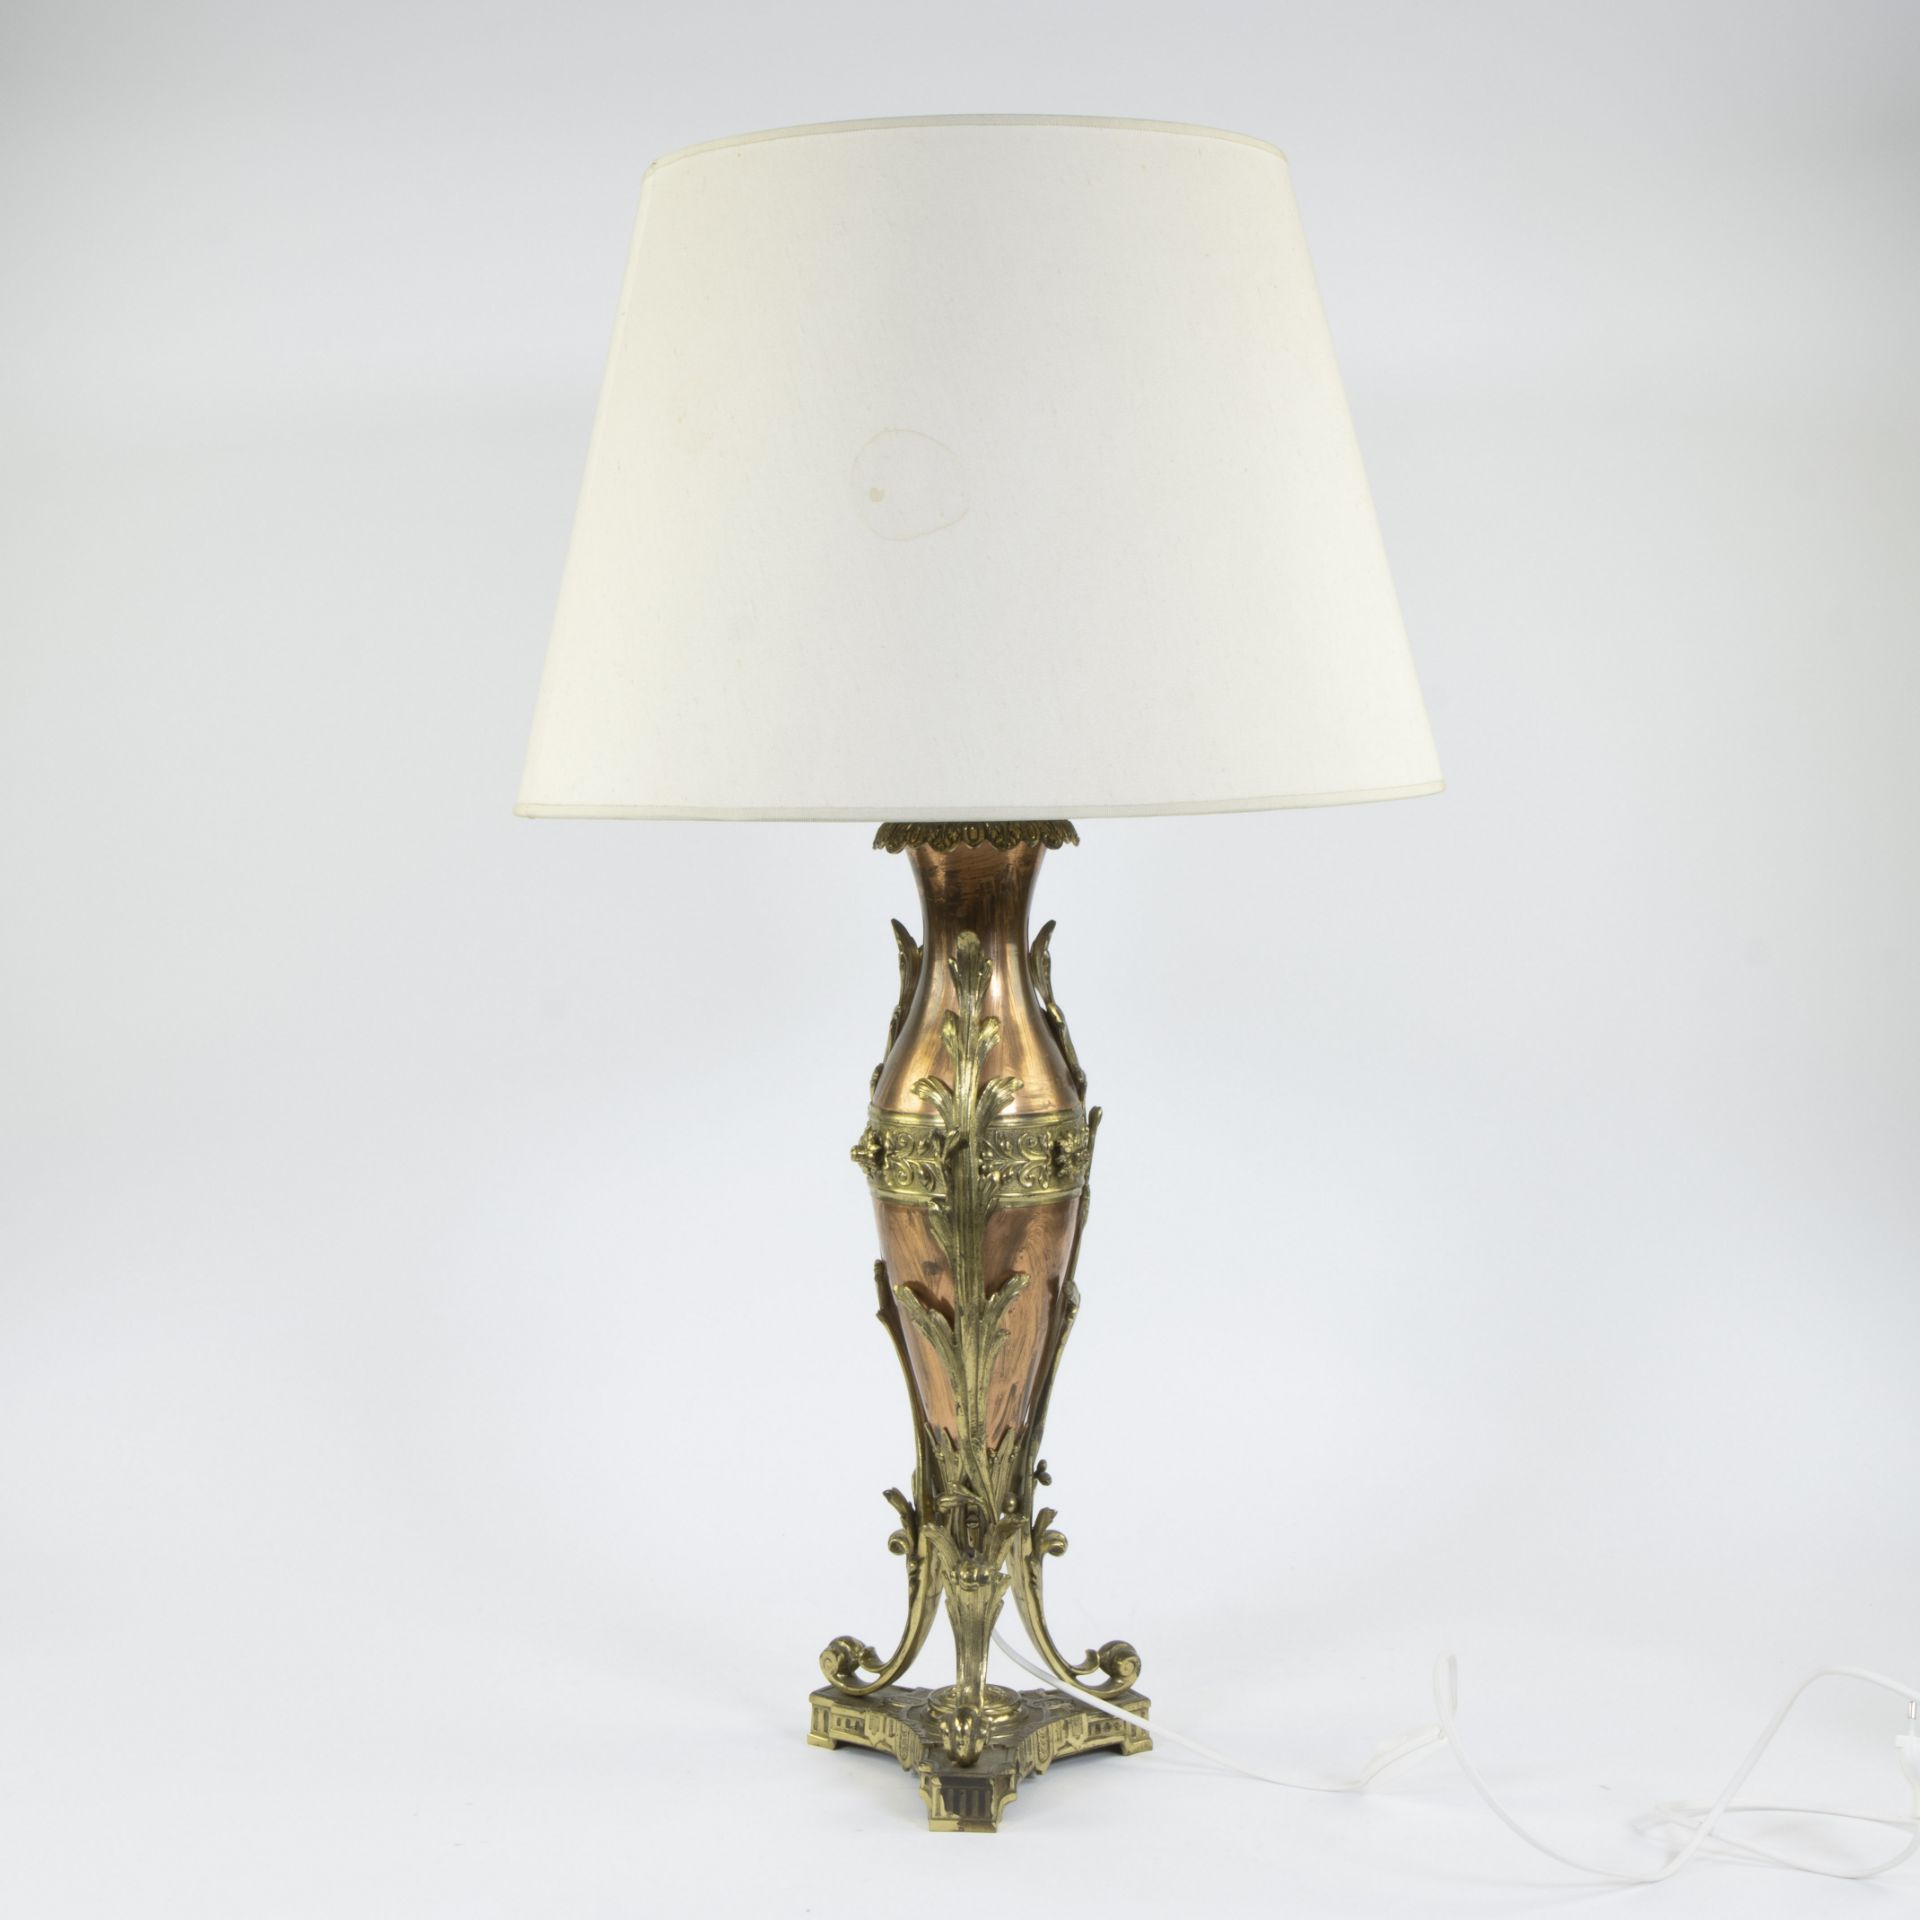 Lampadaire with base in copper and gilt brass, early 20th century - Image 2 of 4